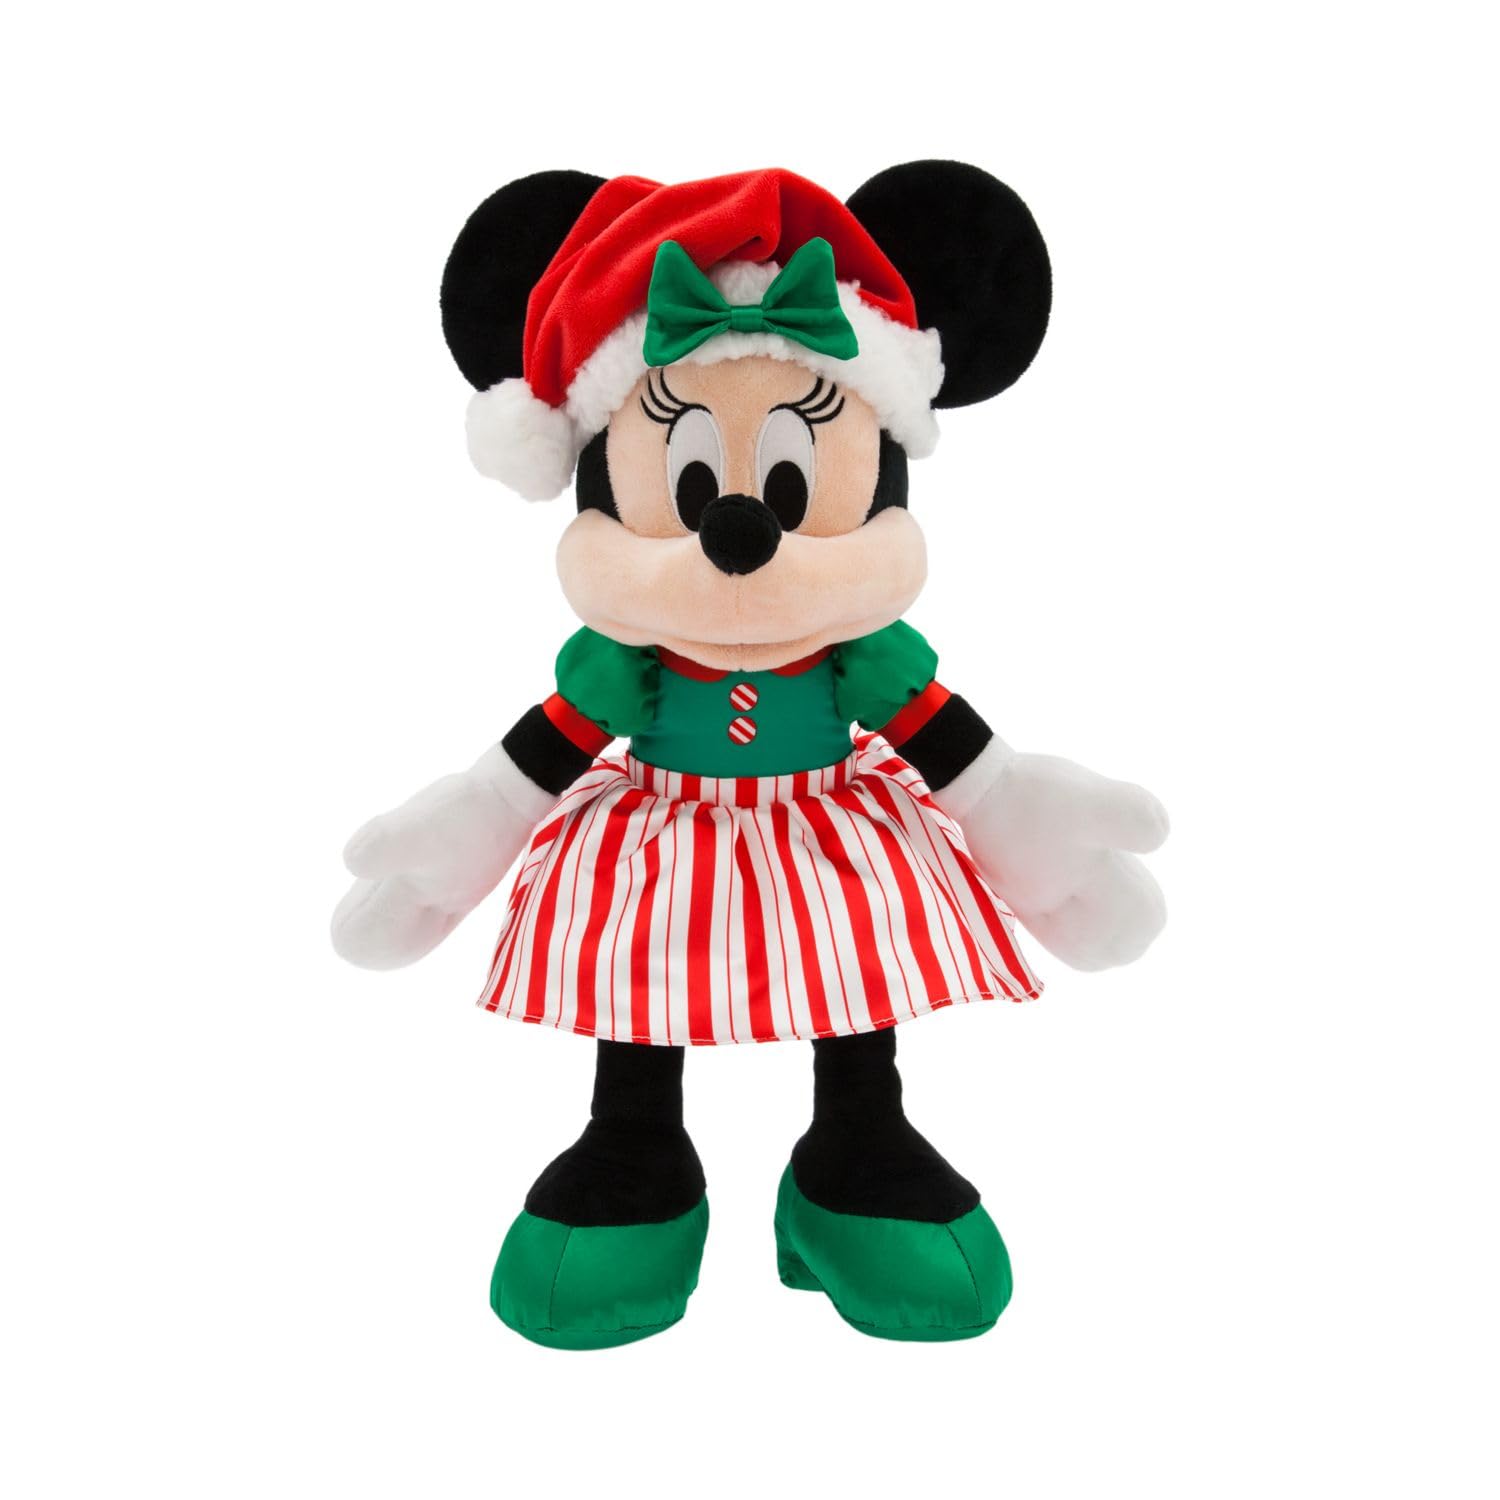 Disney Store Official Minnie Mouse 2023 Special Edition Holiday Plush – Medium 15-Inch Stuffed Toy – Exclusive Seasonal Release Perfect for Gifting and Decor – Celebrate in True Fashion